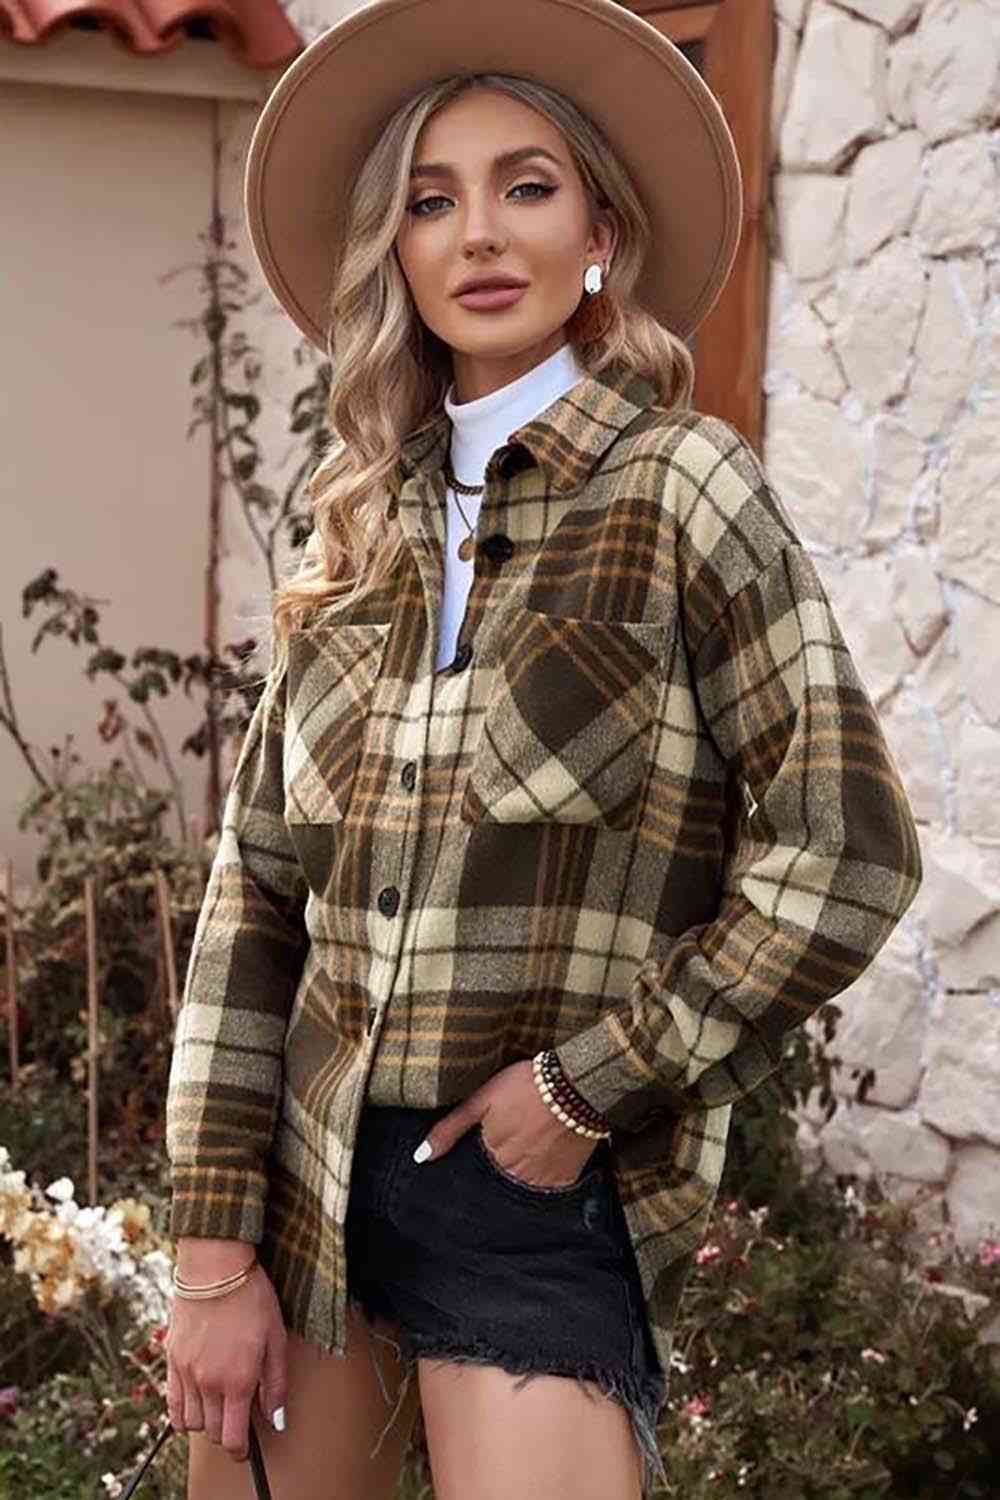 Plaid Collared Neck Button Up Jacket with Pockets - Guy Christopher